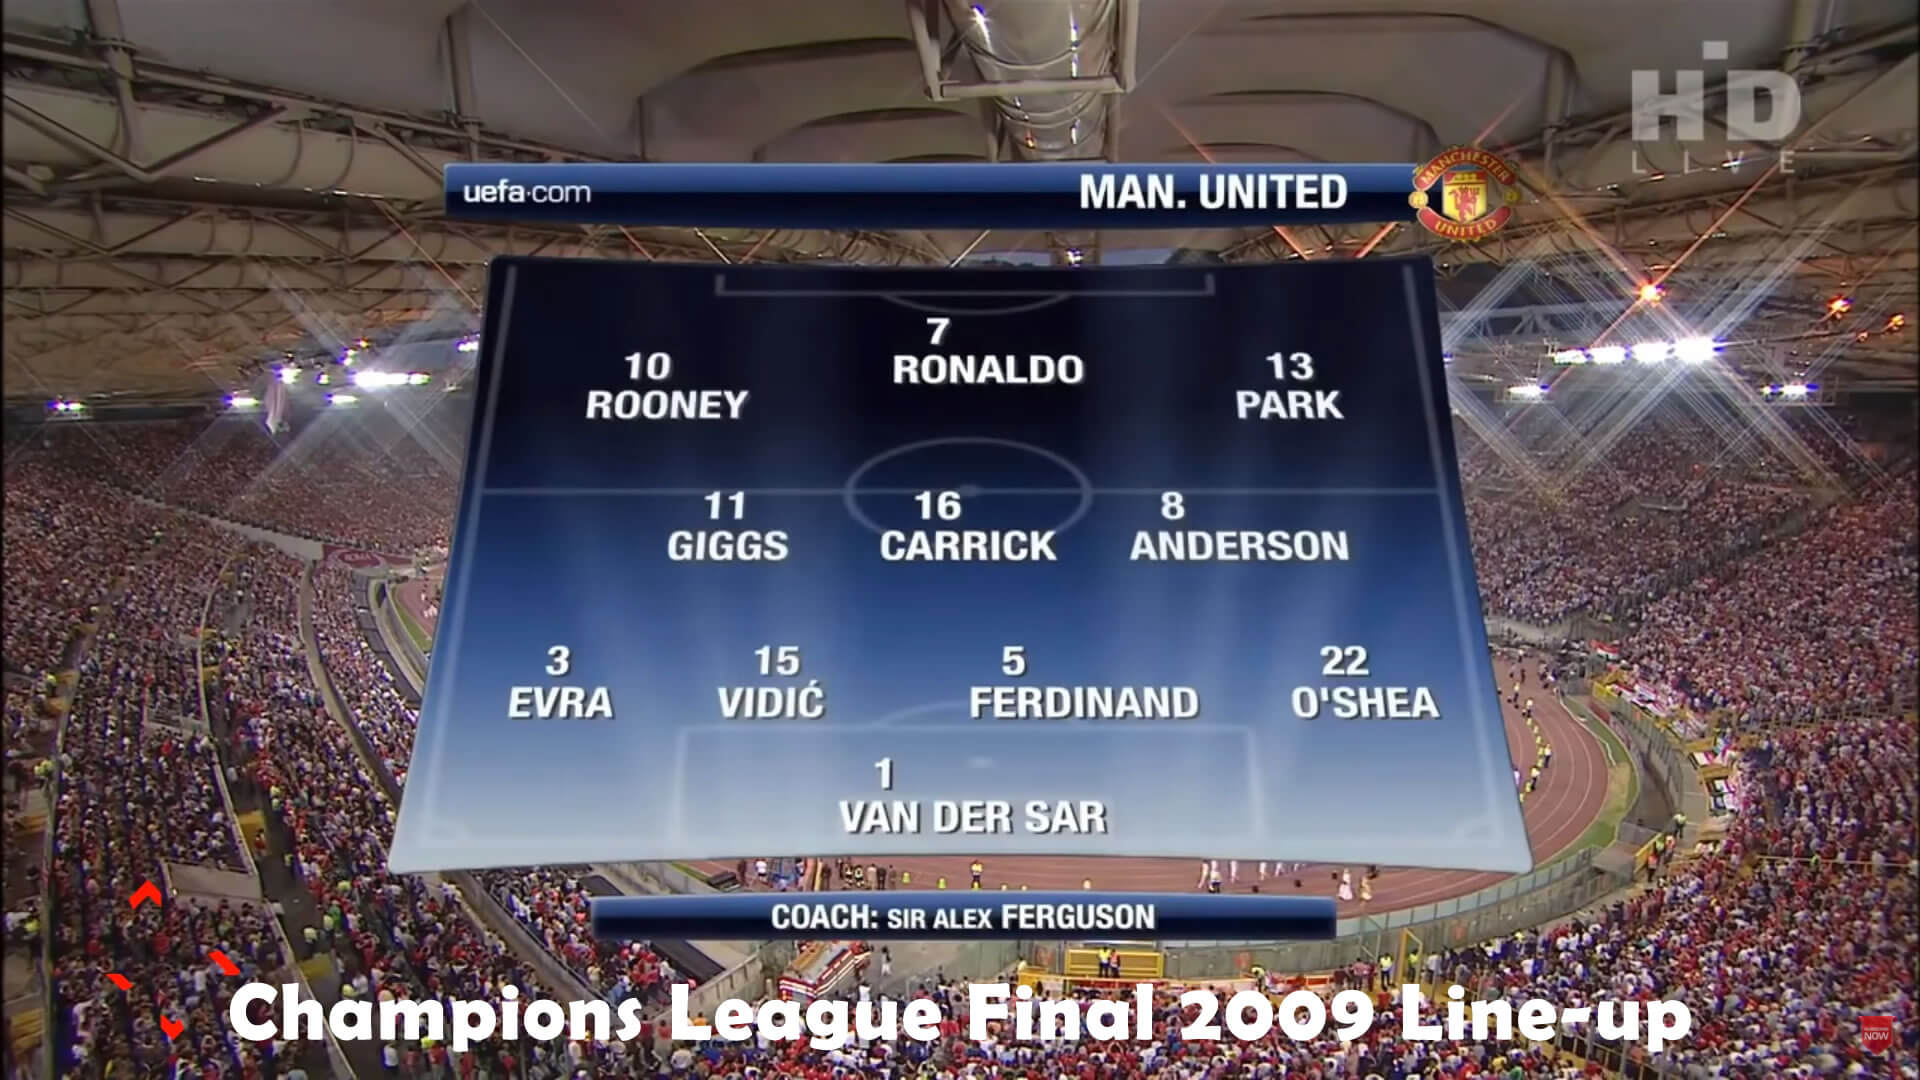 2009 UEFA Champions League Final LineUp - Manchester United